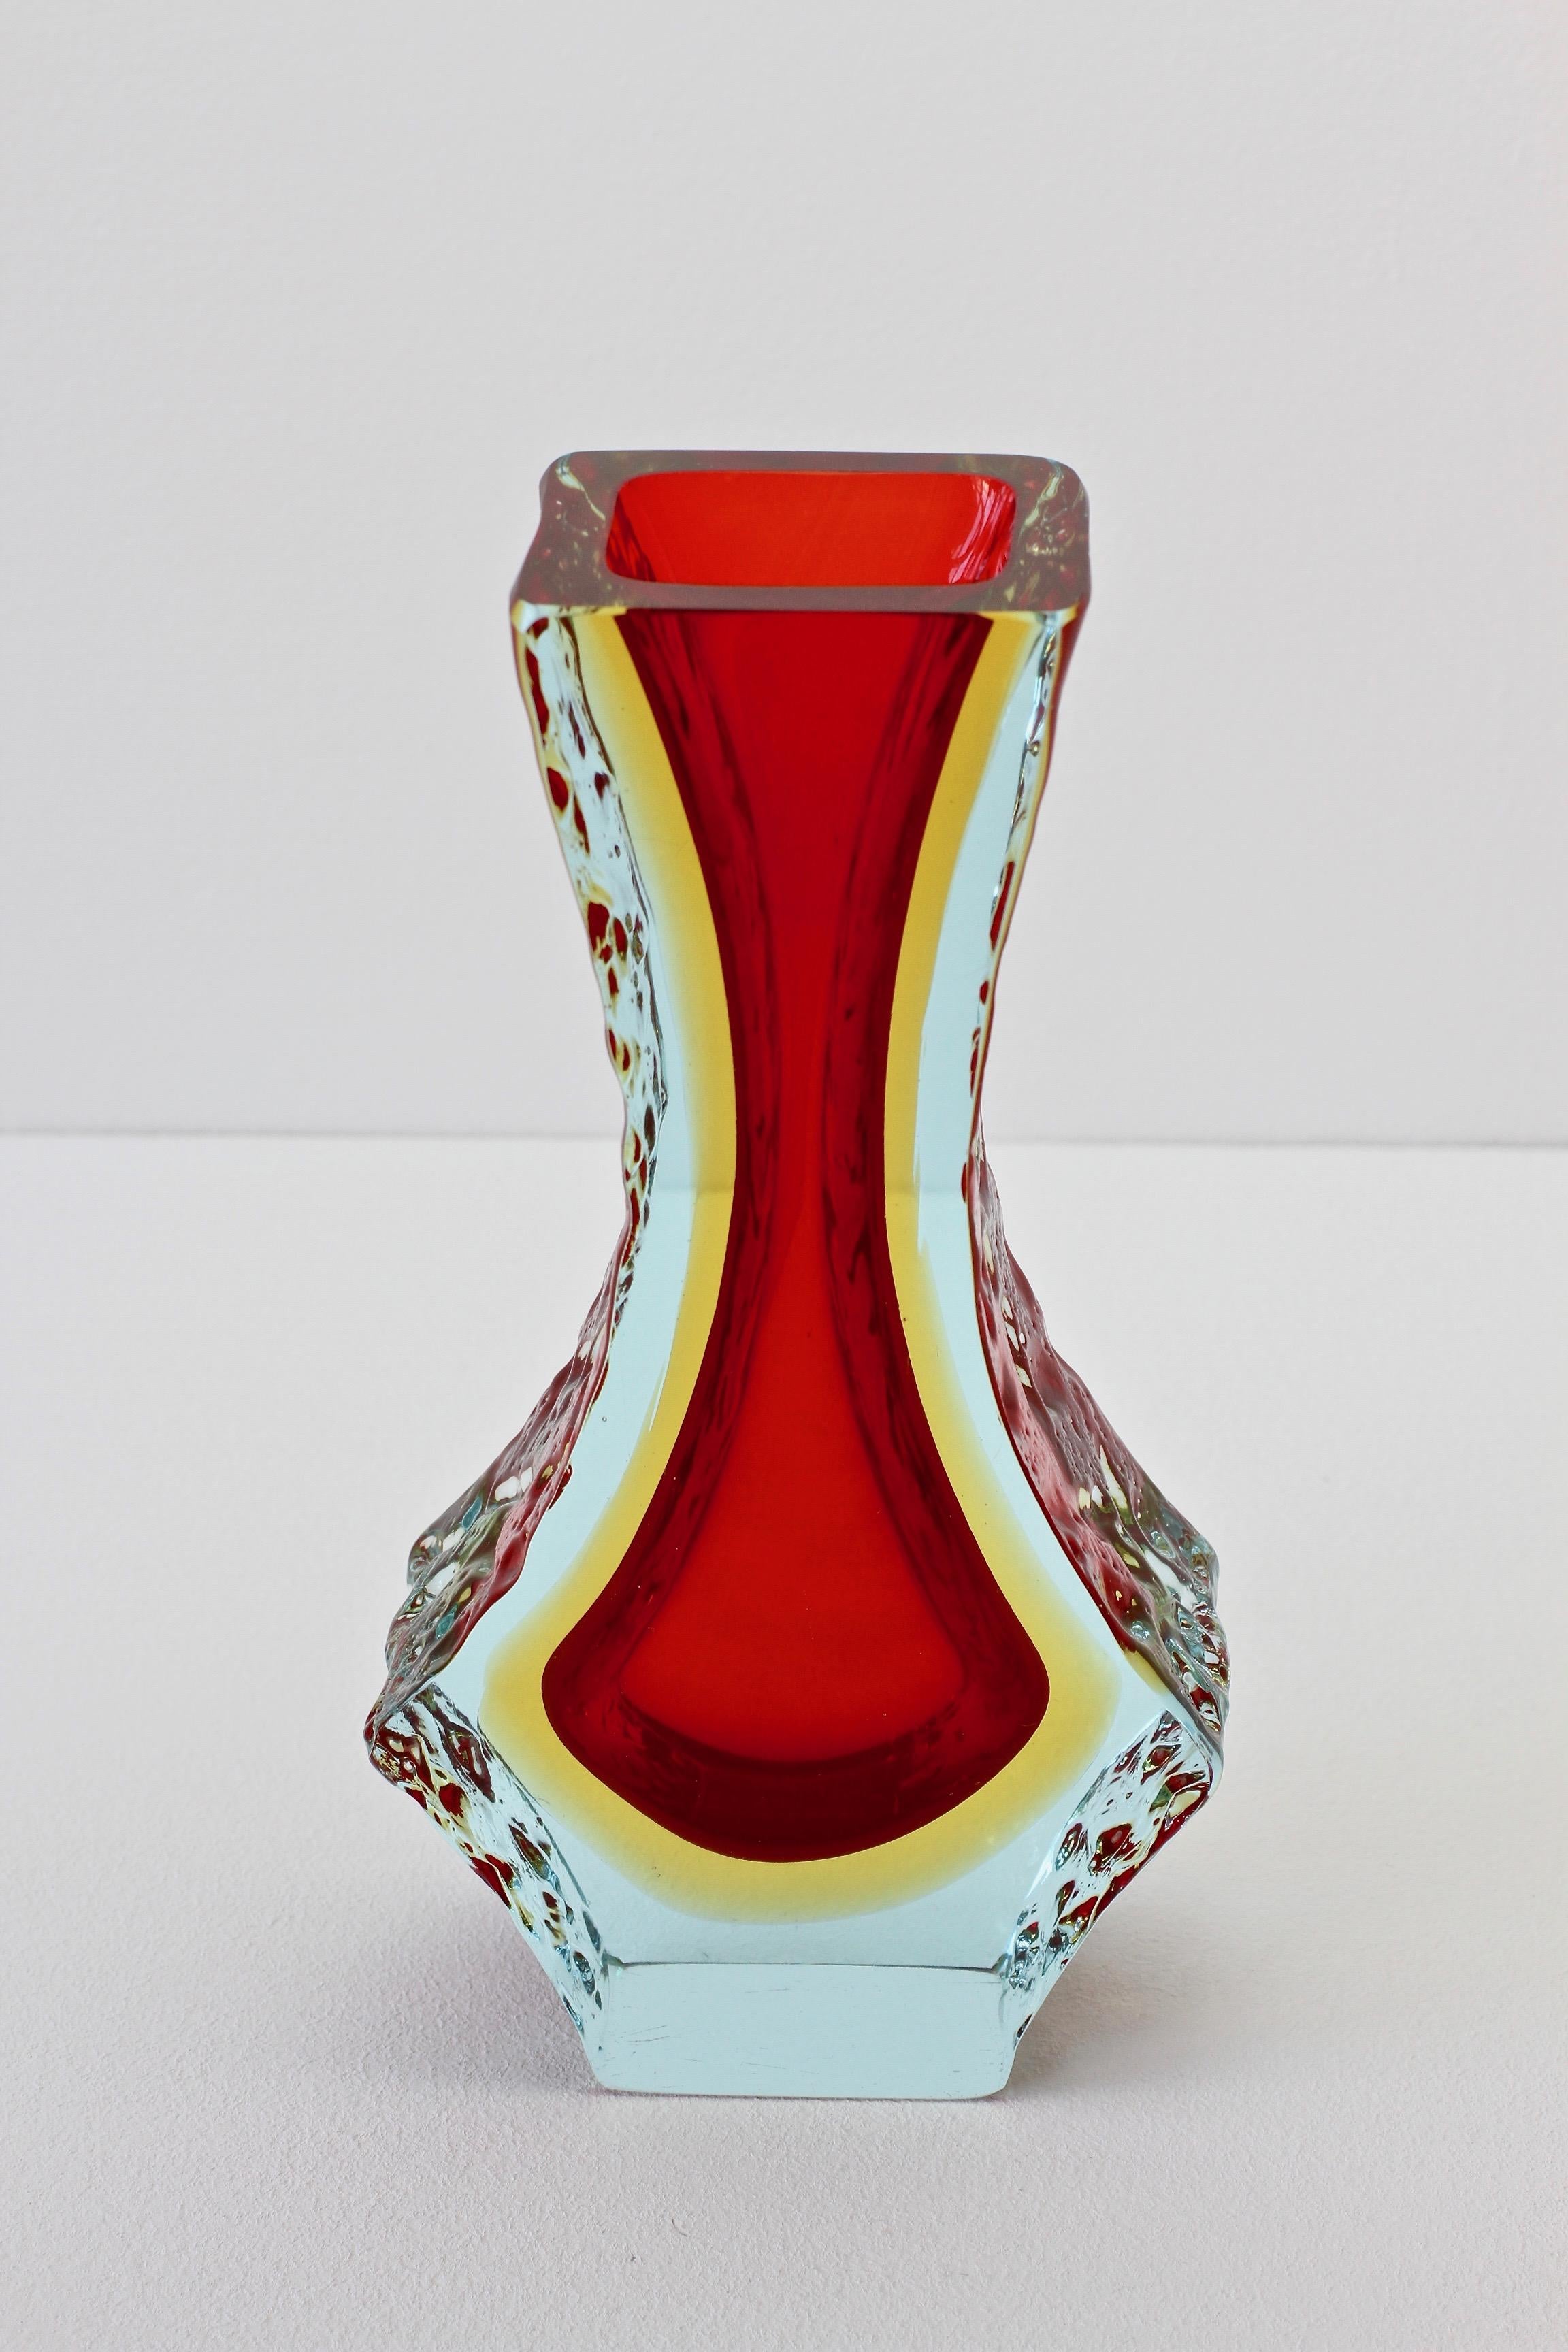 Italian Textured Faceted Murano 'Sommerso' Glass Vase Attributed to Mandruzzato 7